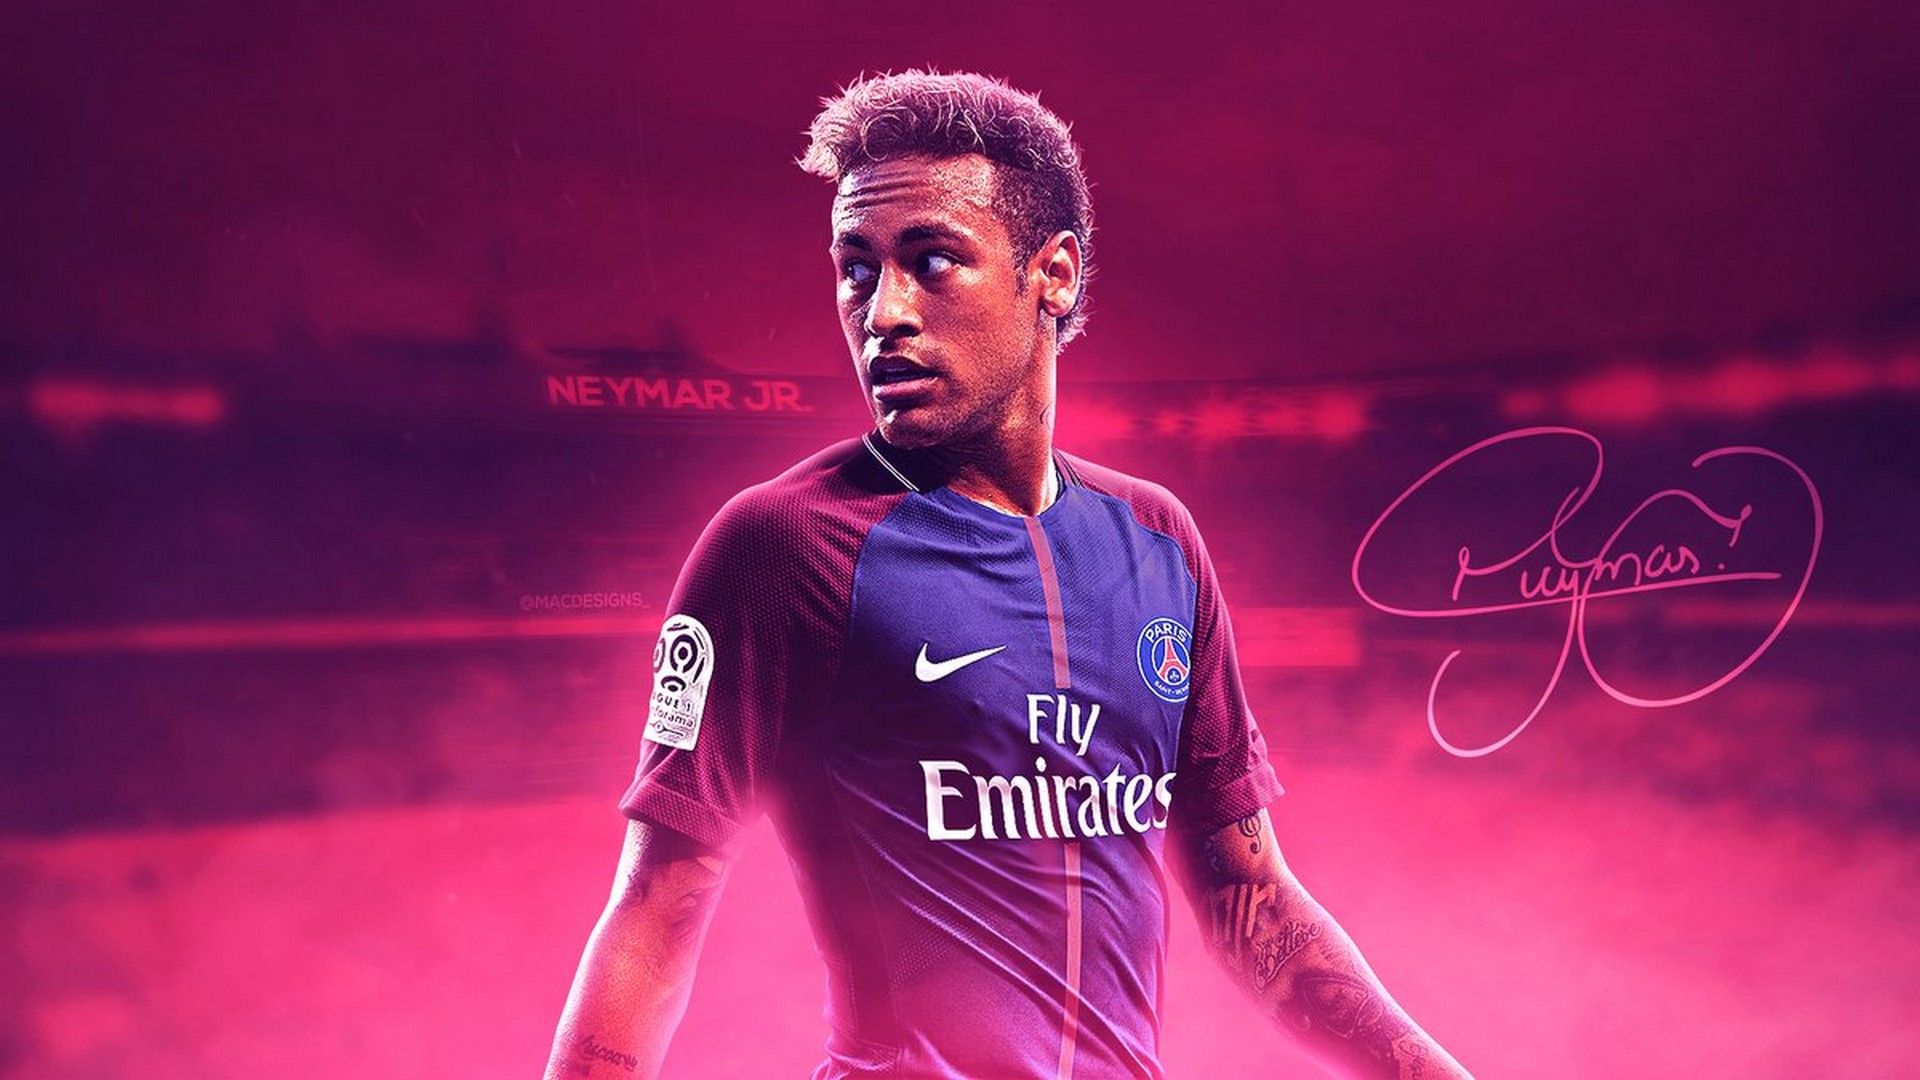 Desktop Wallpaper Neymar with image resolution 1920x1080 pixel. You can use this wallpaper as background for your desktop Computer Screensavers, Android or iPhone smartphones